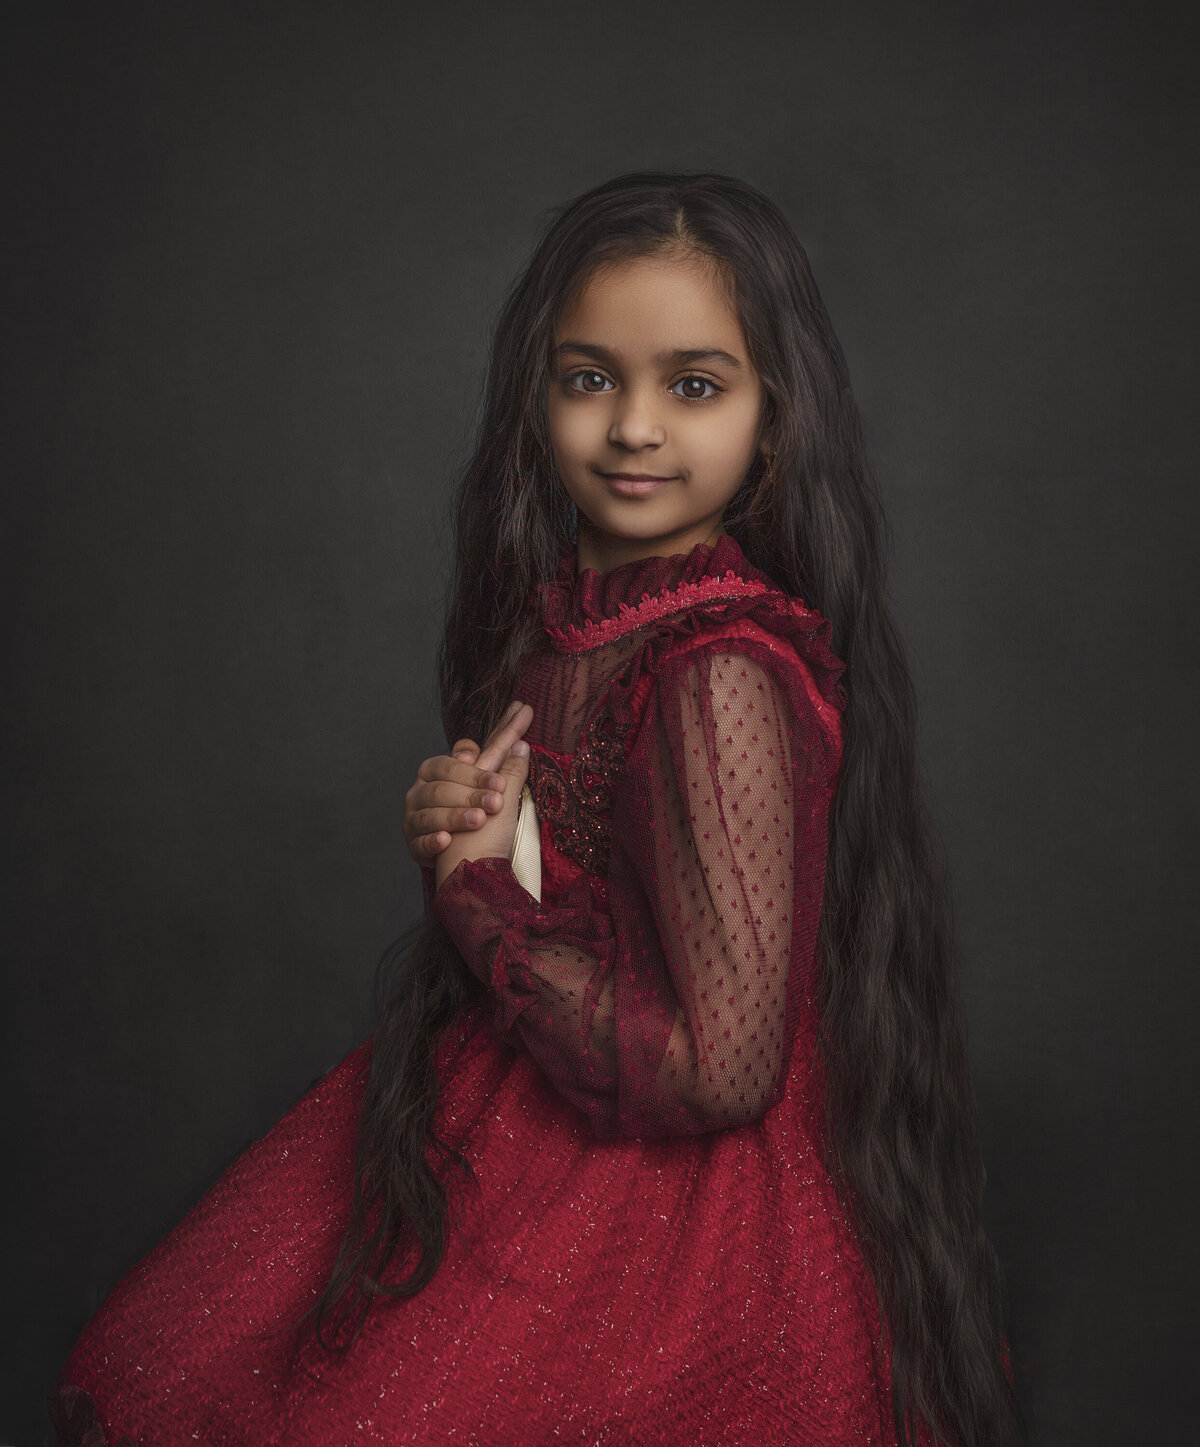 Young girl in red couture gown posing for a photo in a portrait studio/ Sonia Gourlie Fine Art Photography / Ottawa Ontario